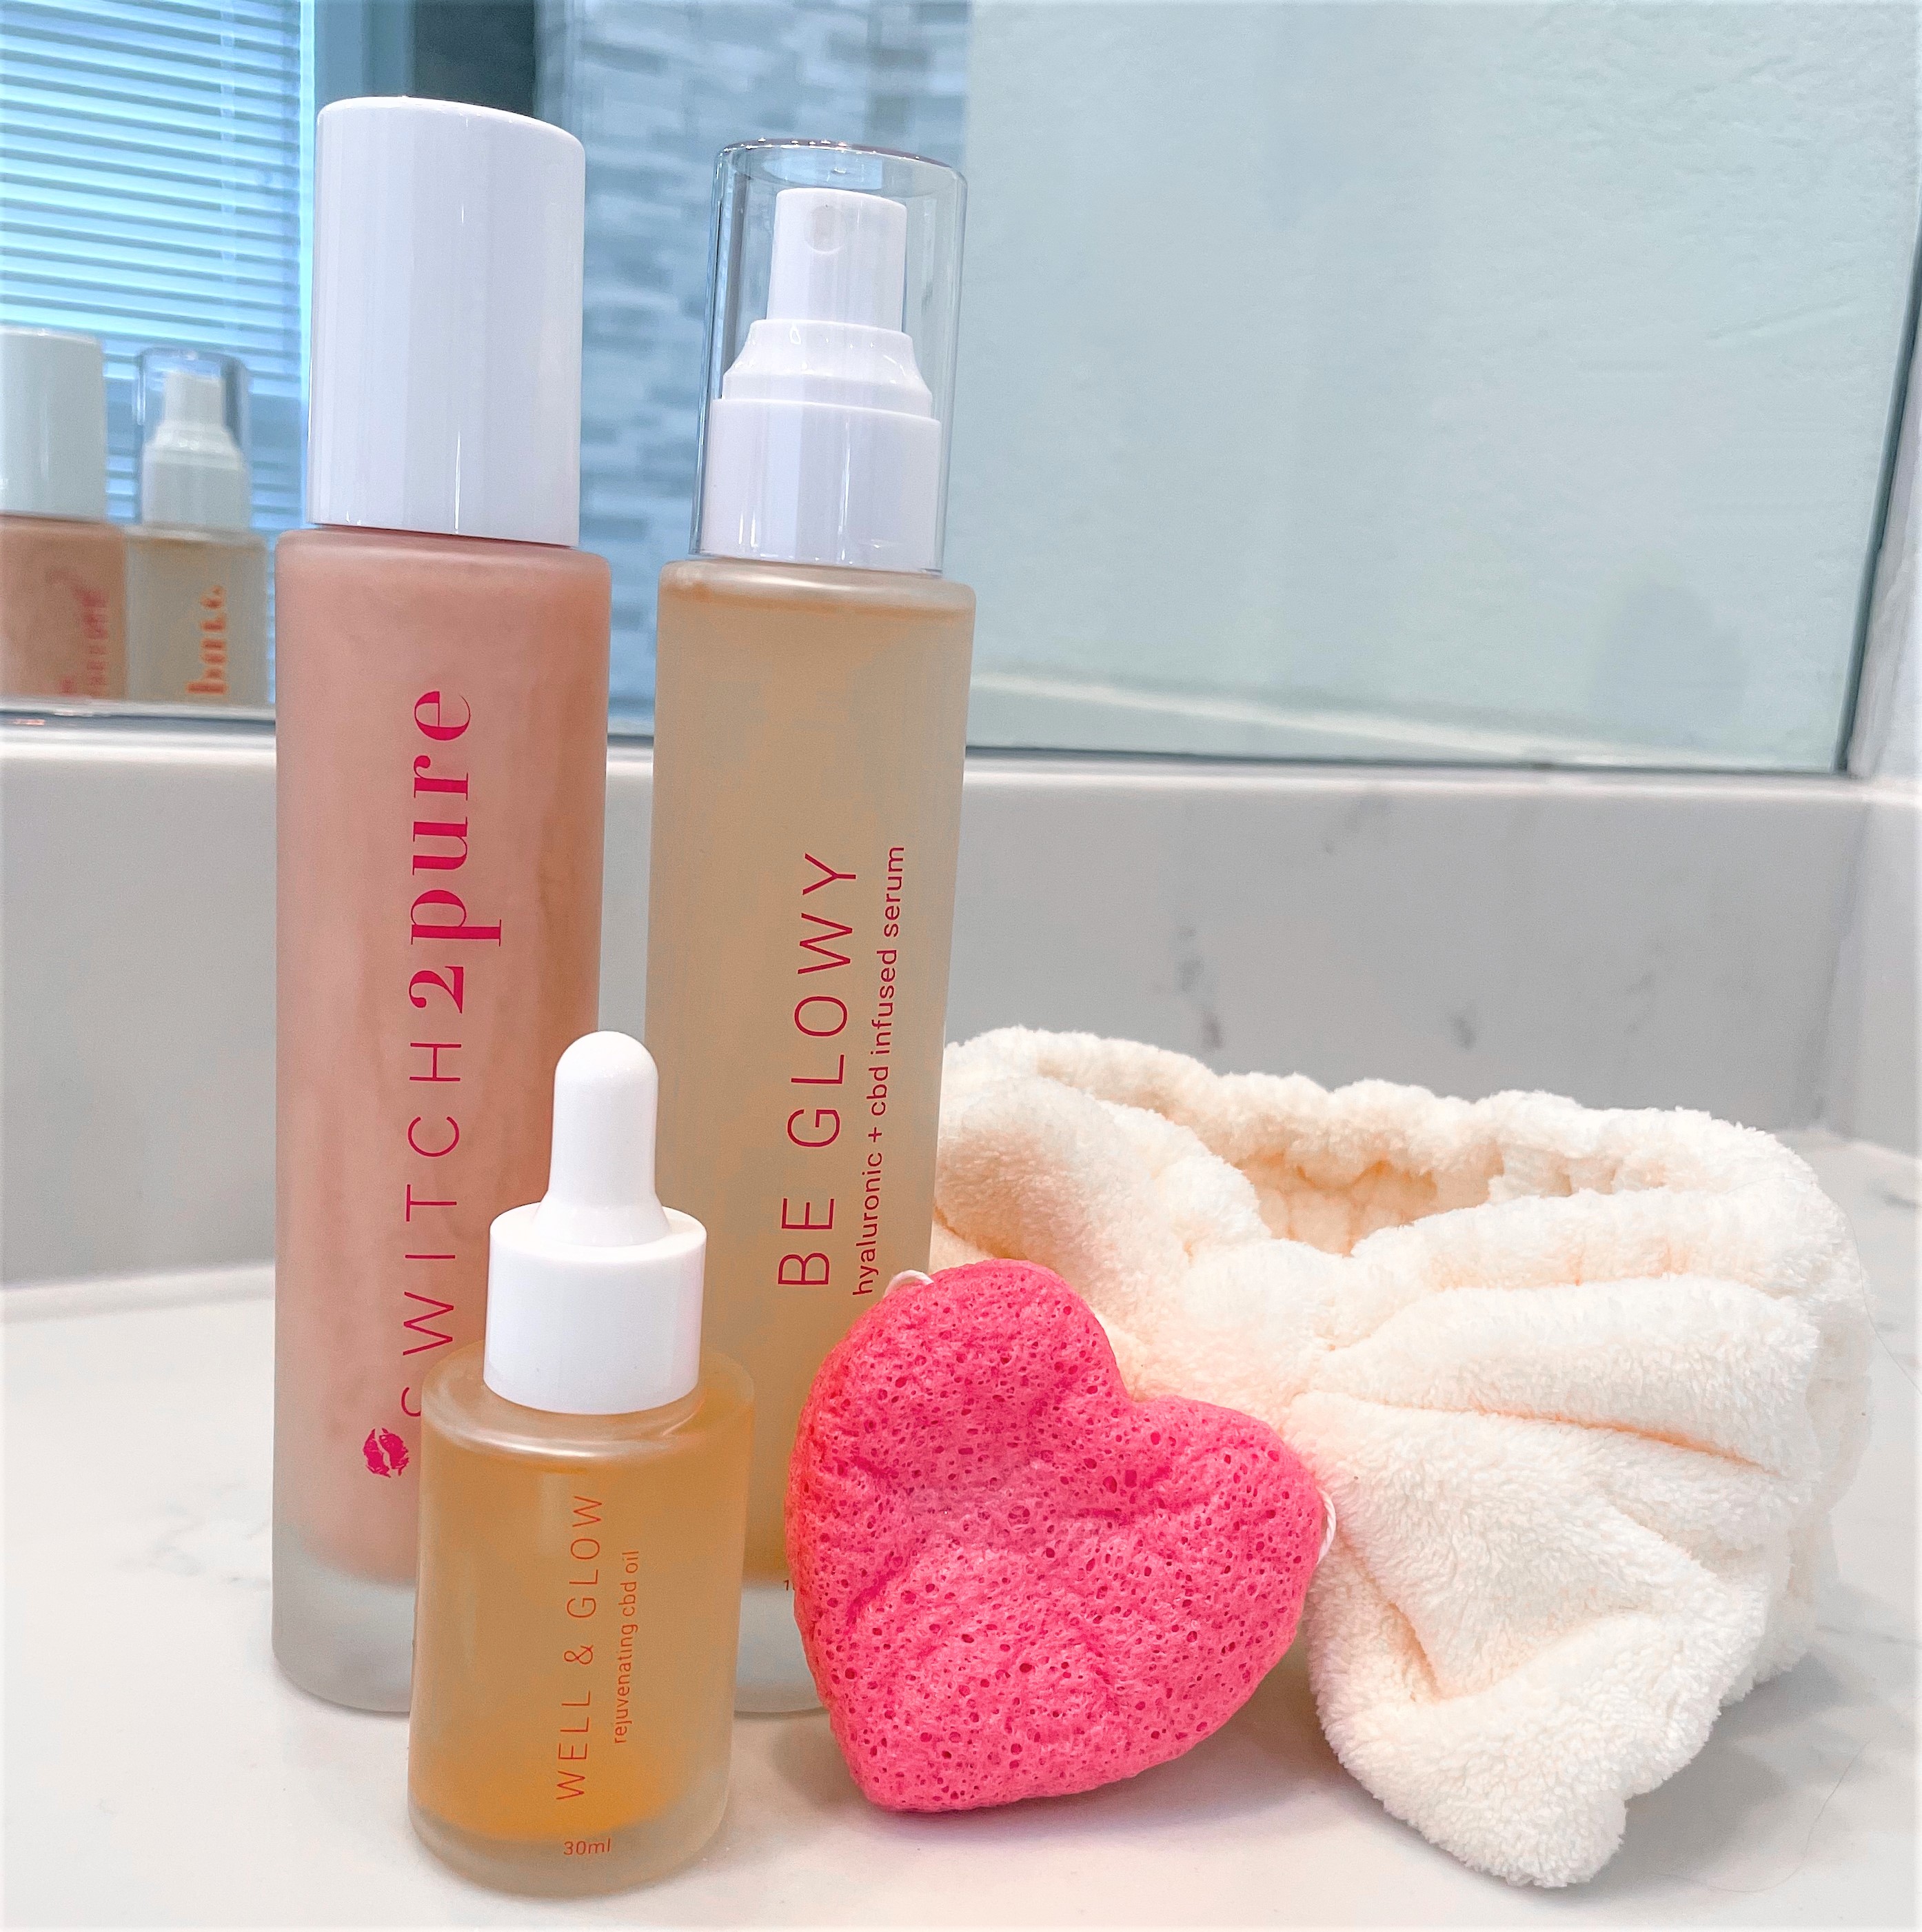 Switch2pure skincare. Bright and shine cleanser, Be Glowy hyaluronic spray serum, and Well & Glow retinol alternative facial oil